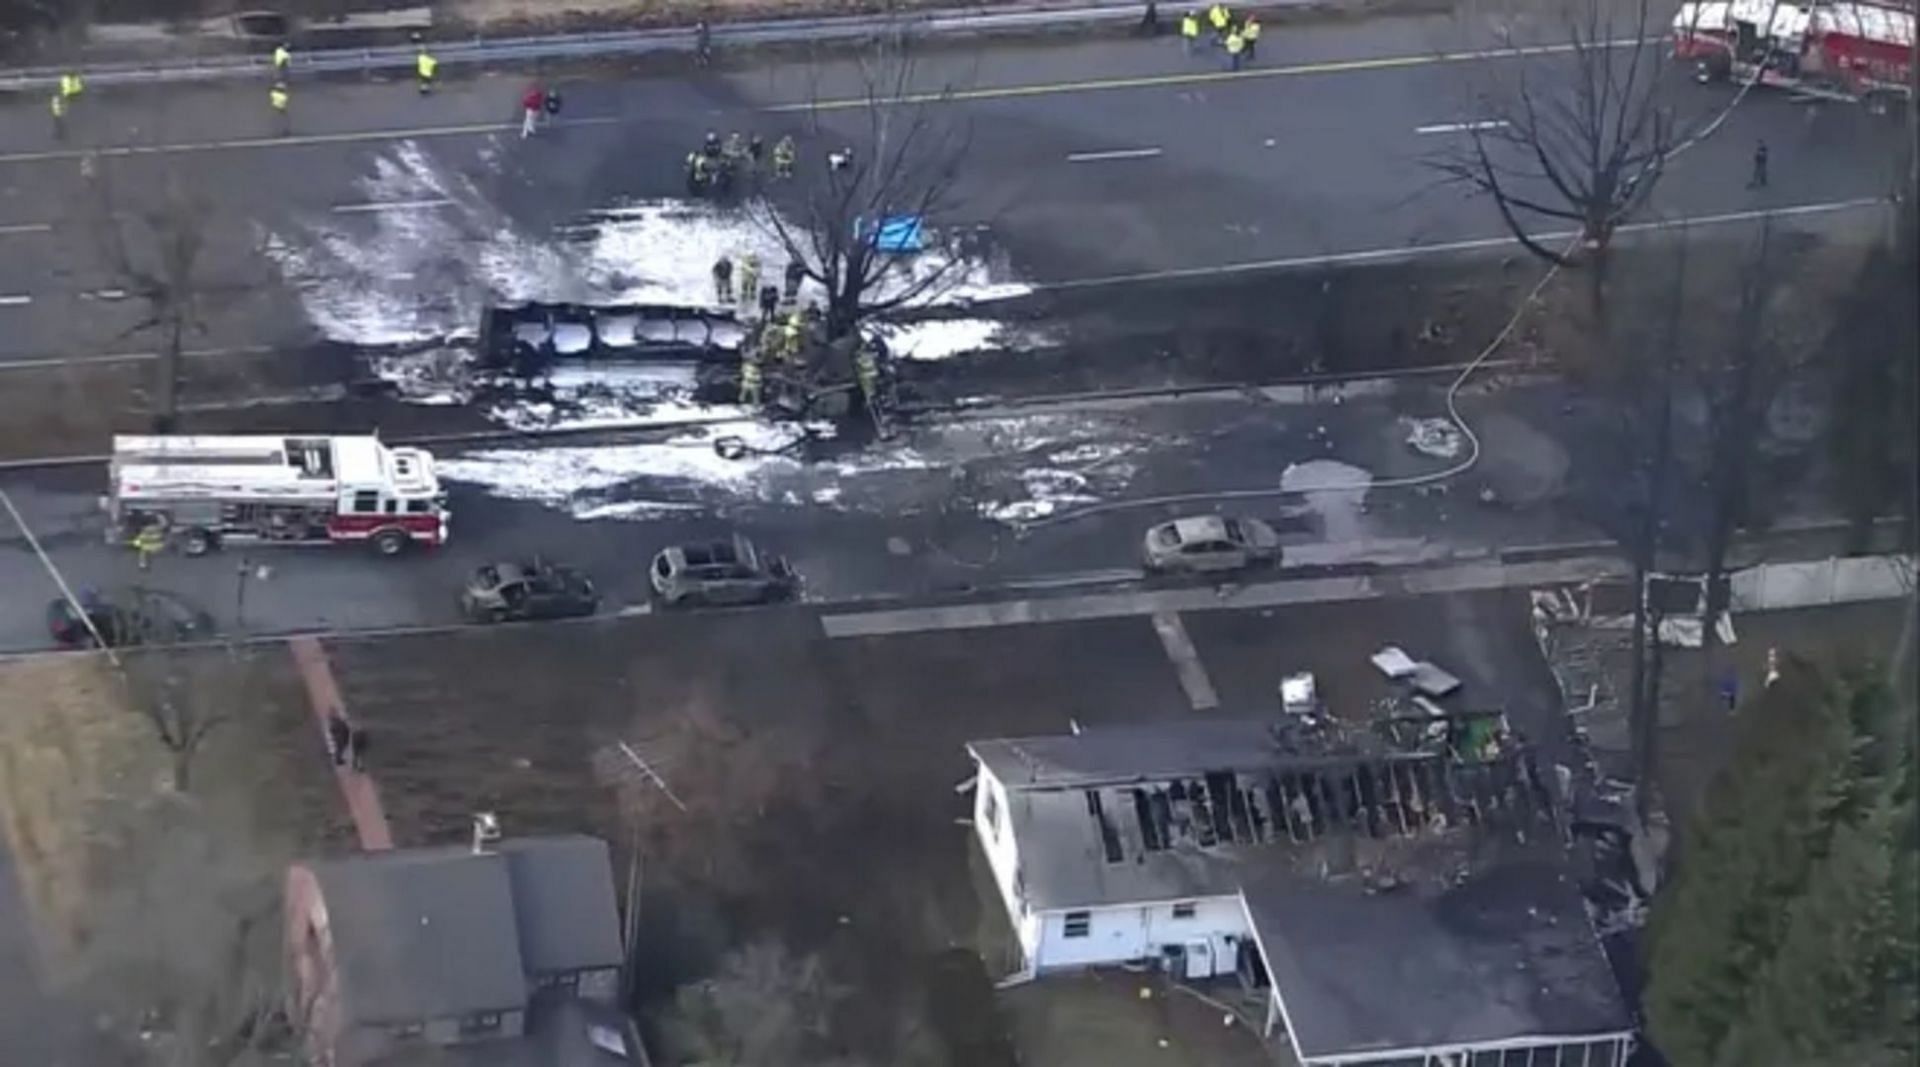 The fire from a tanker truck crash in Frederick County, Maryland, was contained by emergency crews (Image credits - WJLA via Associated Press)